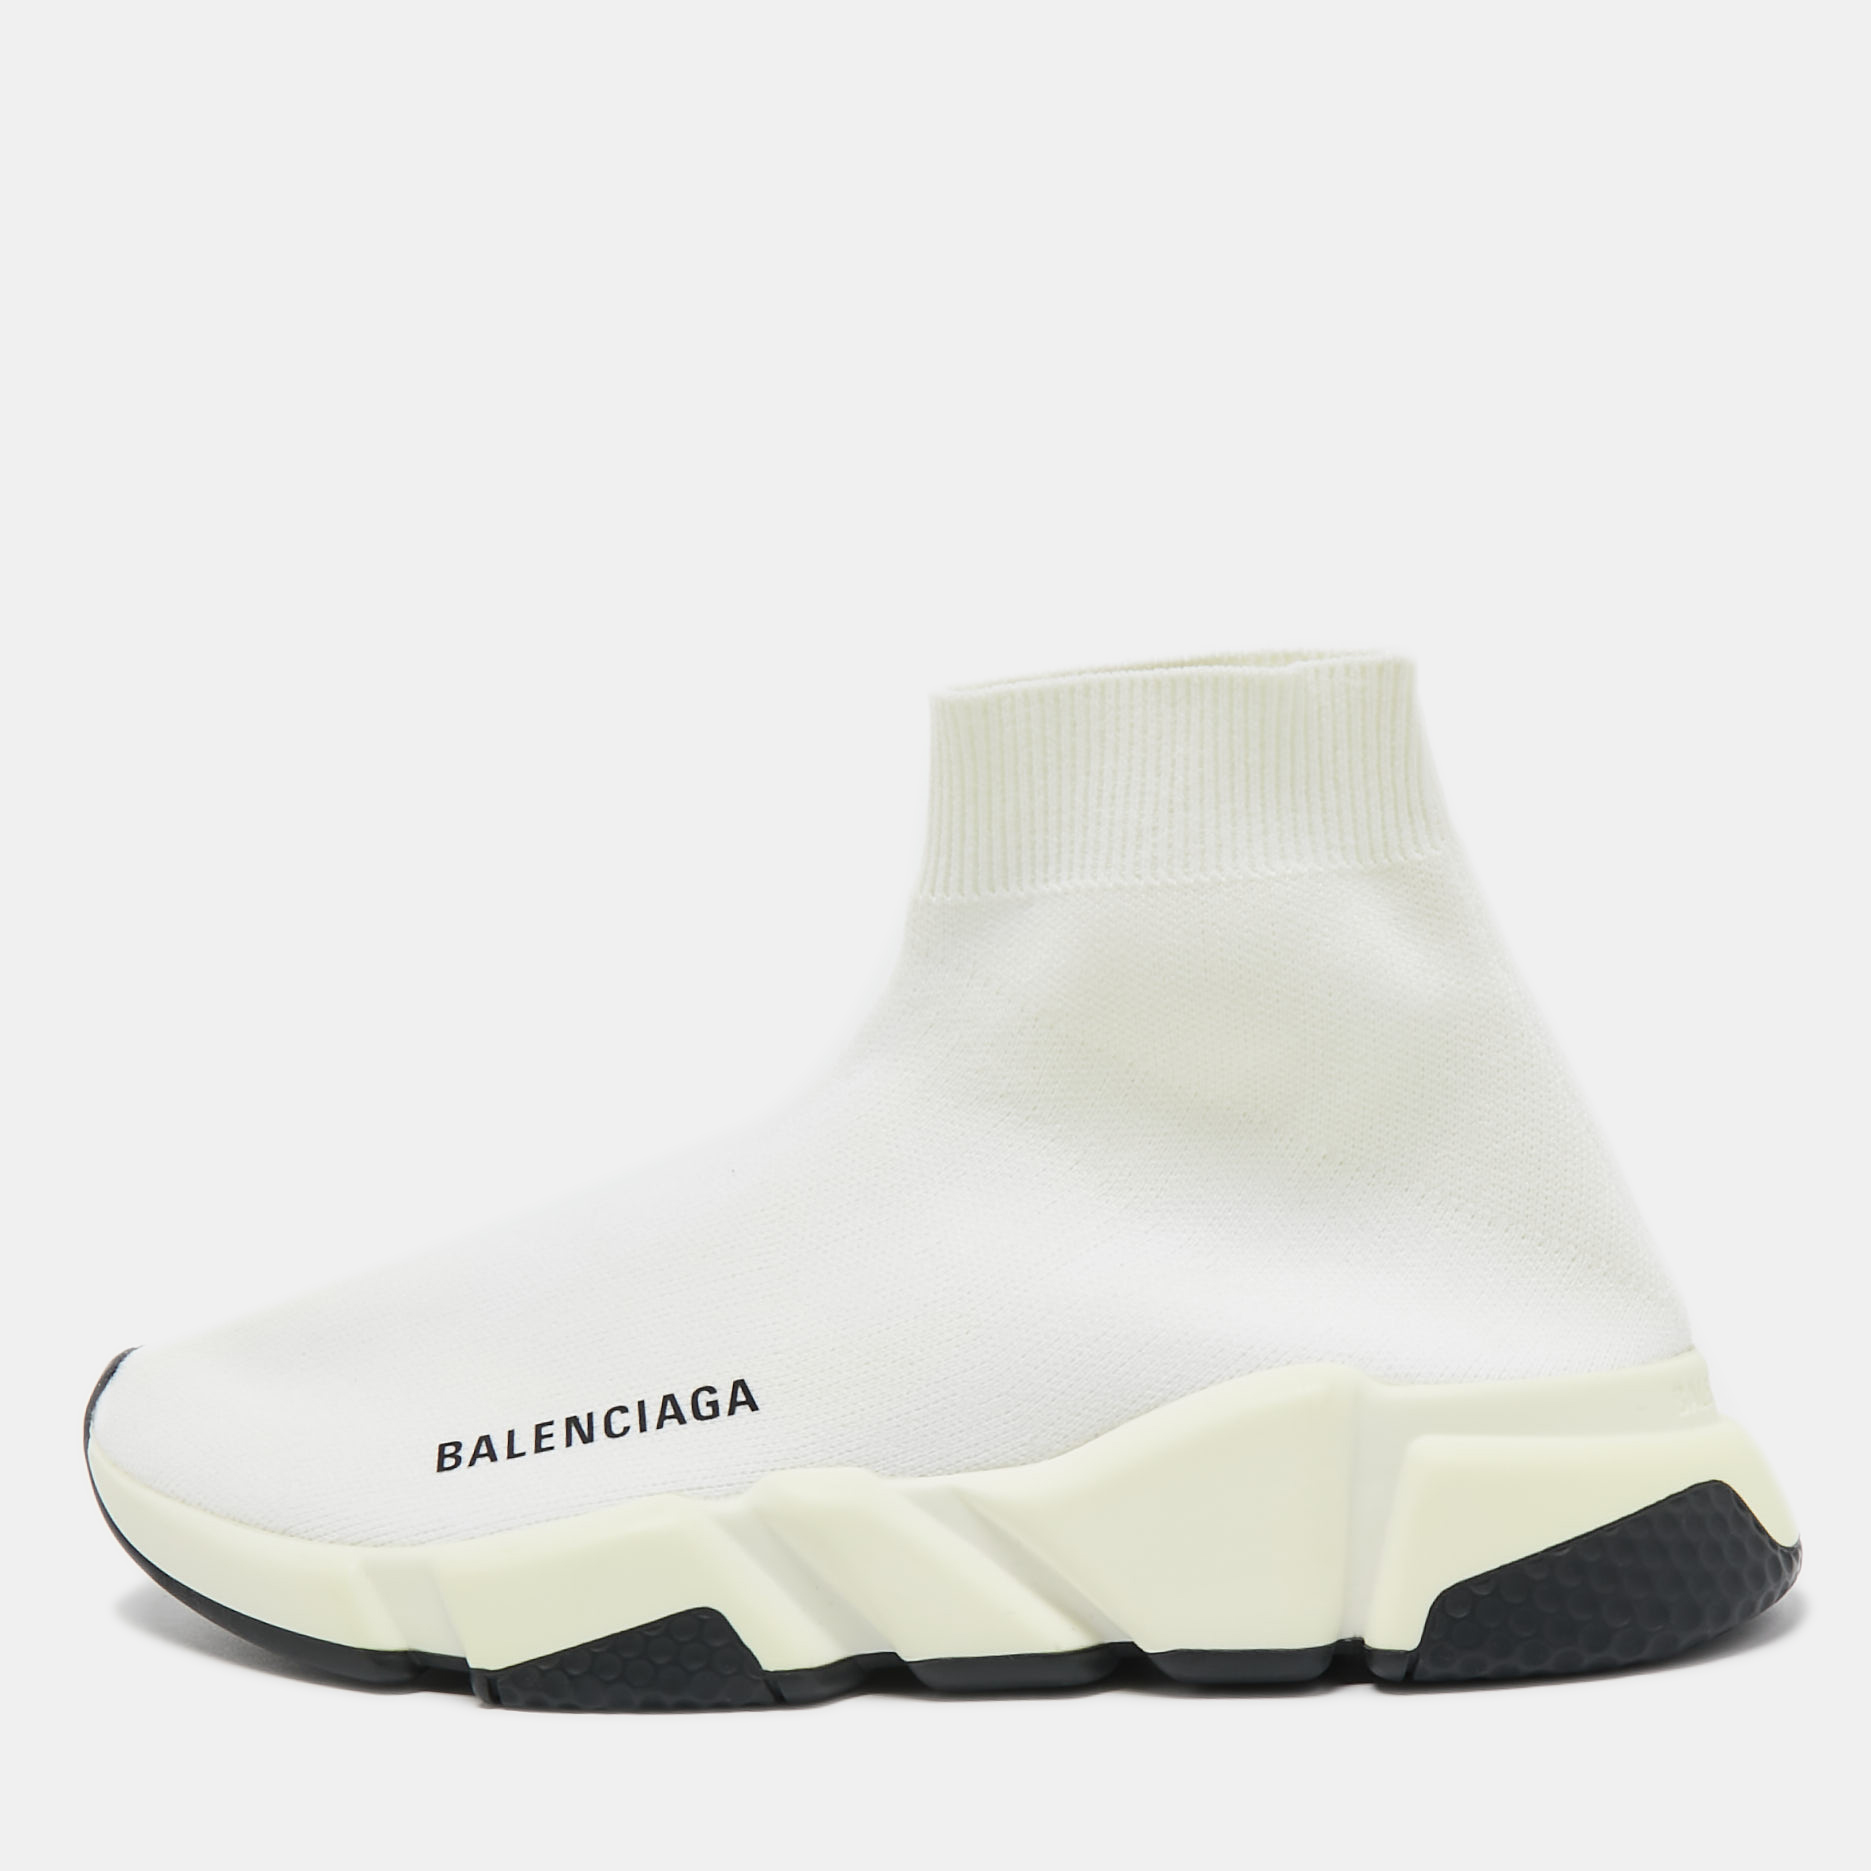 Balenciaga Off White Knit Fabric Speed Trainer Sneakers Size 37